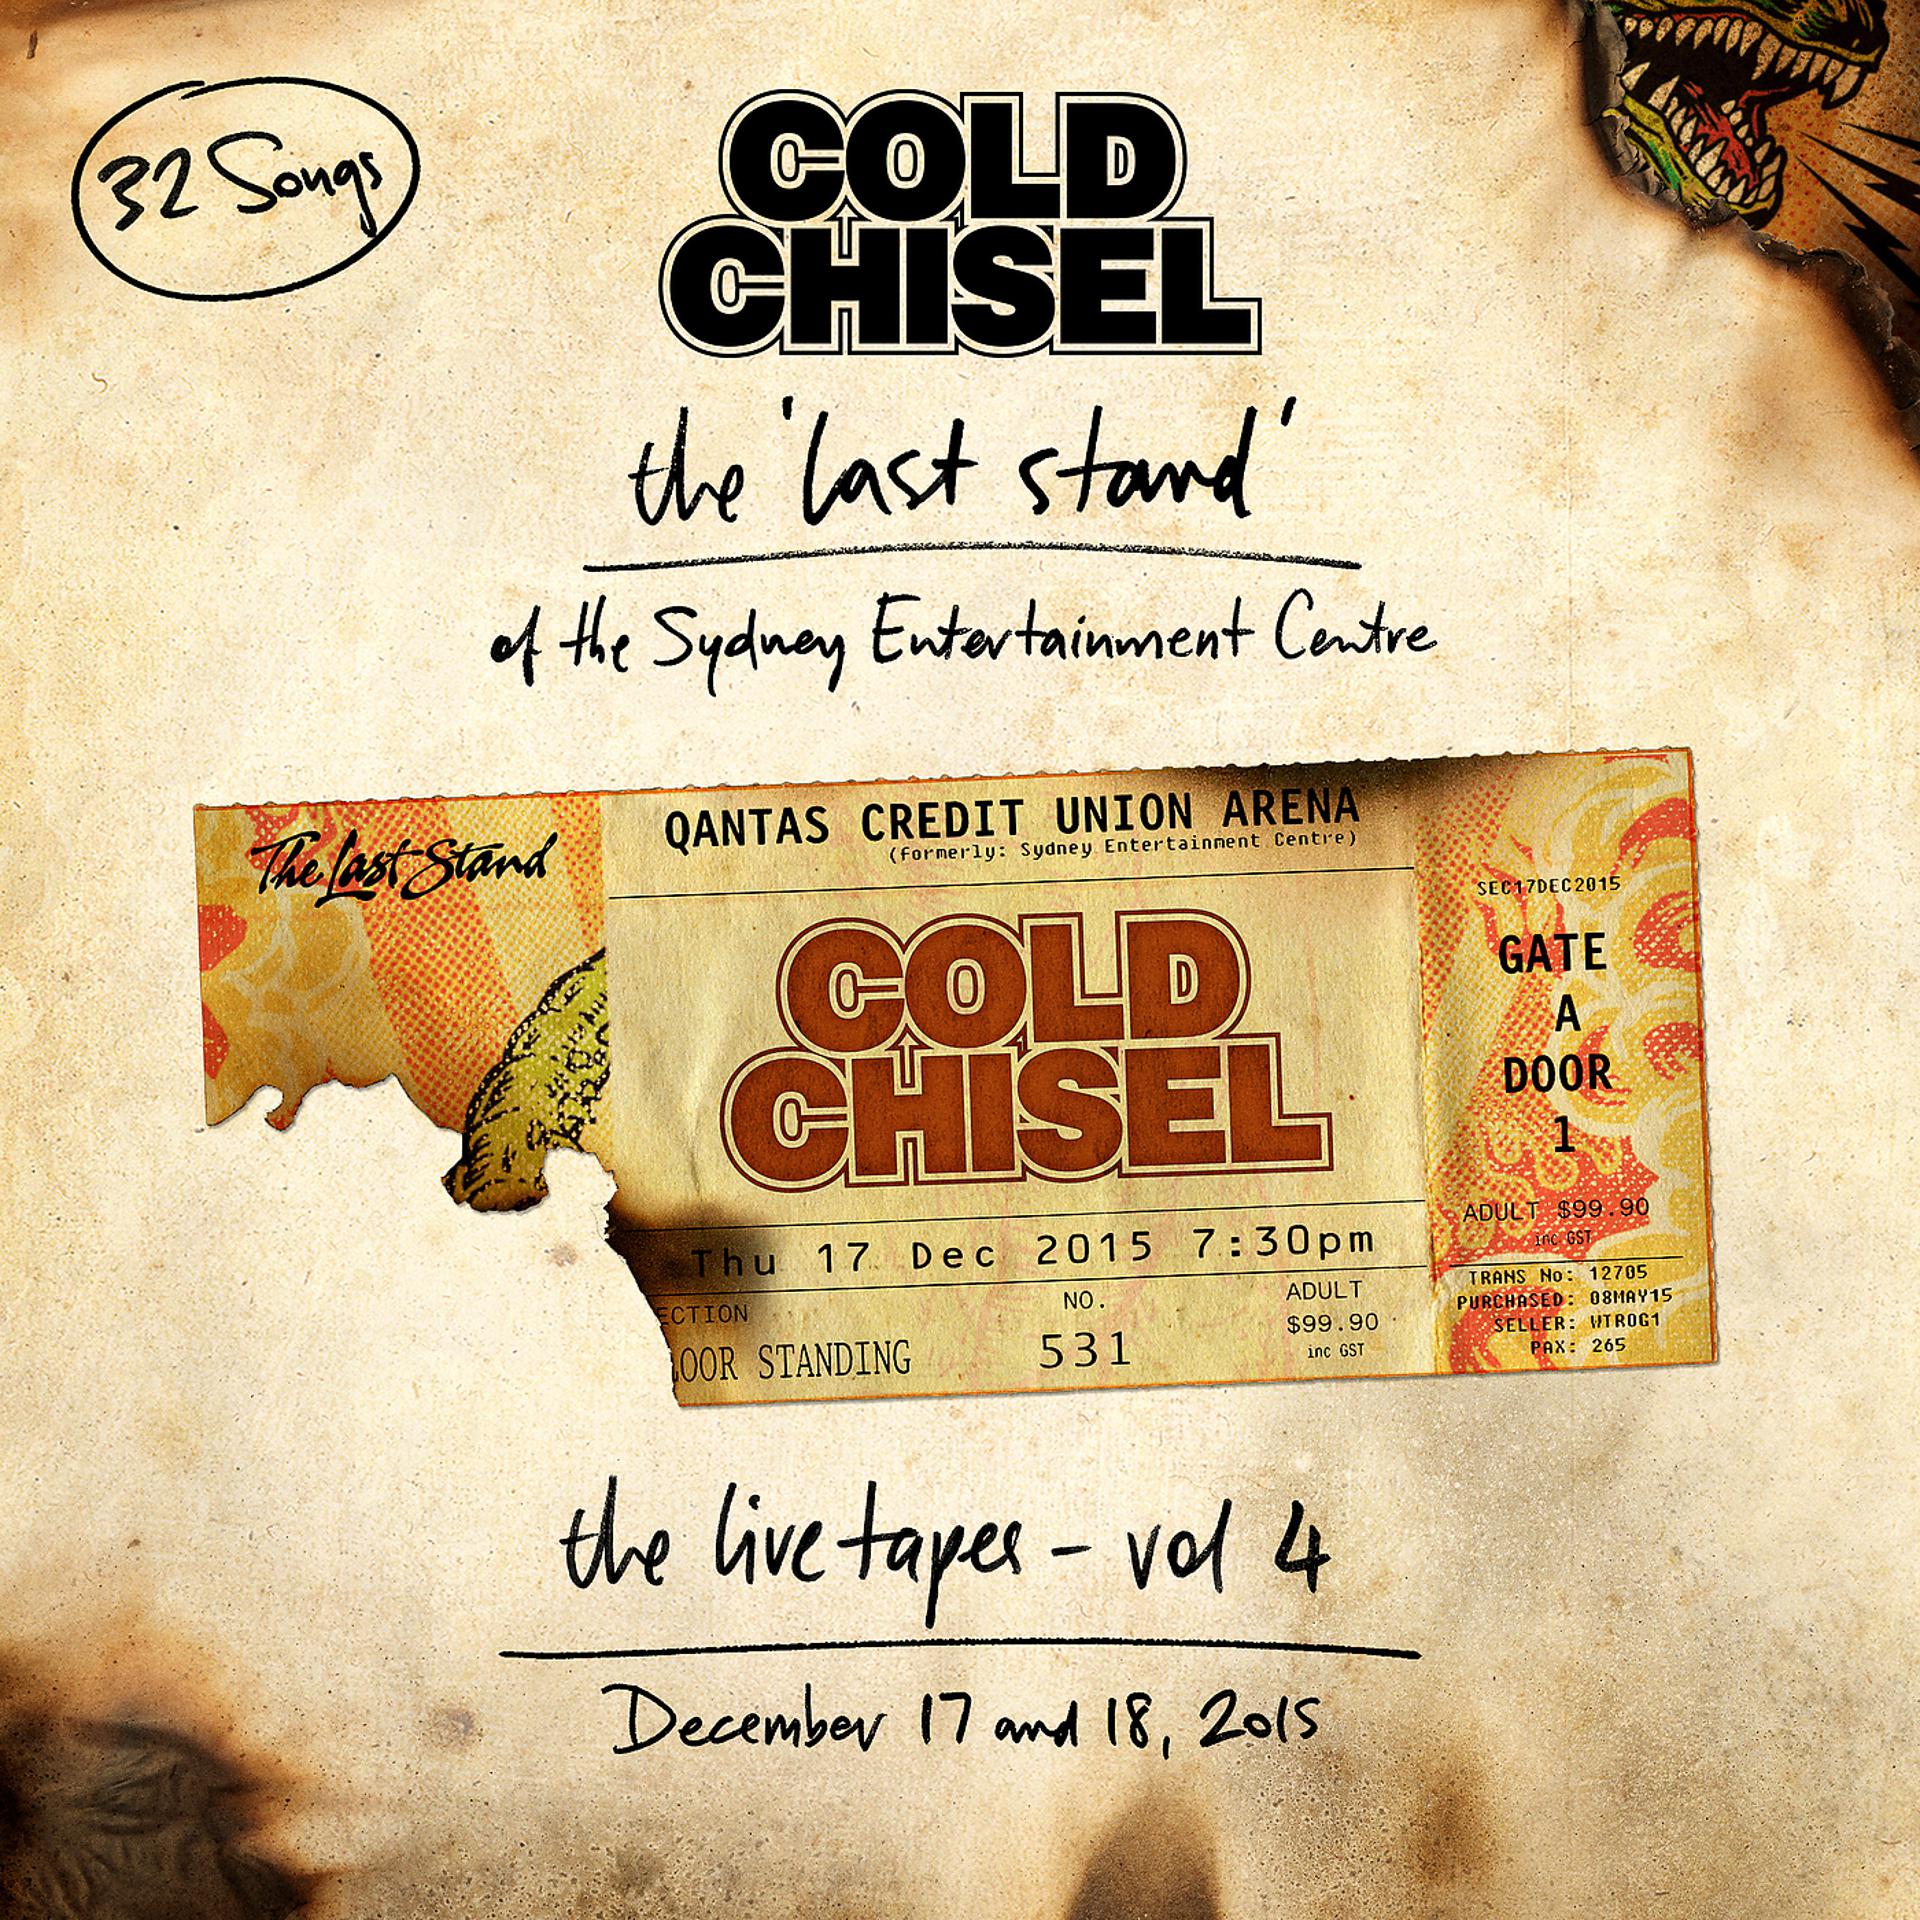 Постер альбома The Live Tapes Vol 4: The Last Stand of the Sydney Entertainment Centre, December 17 and 18, 2015